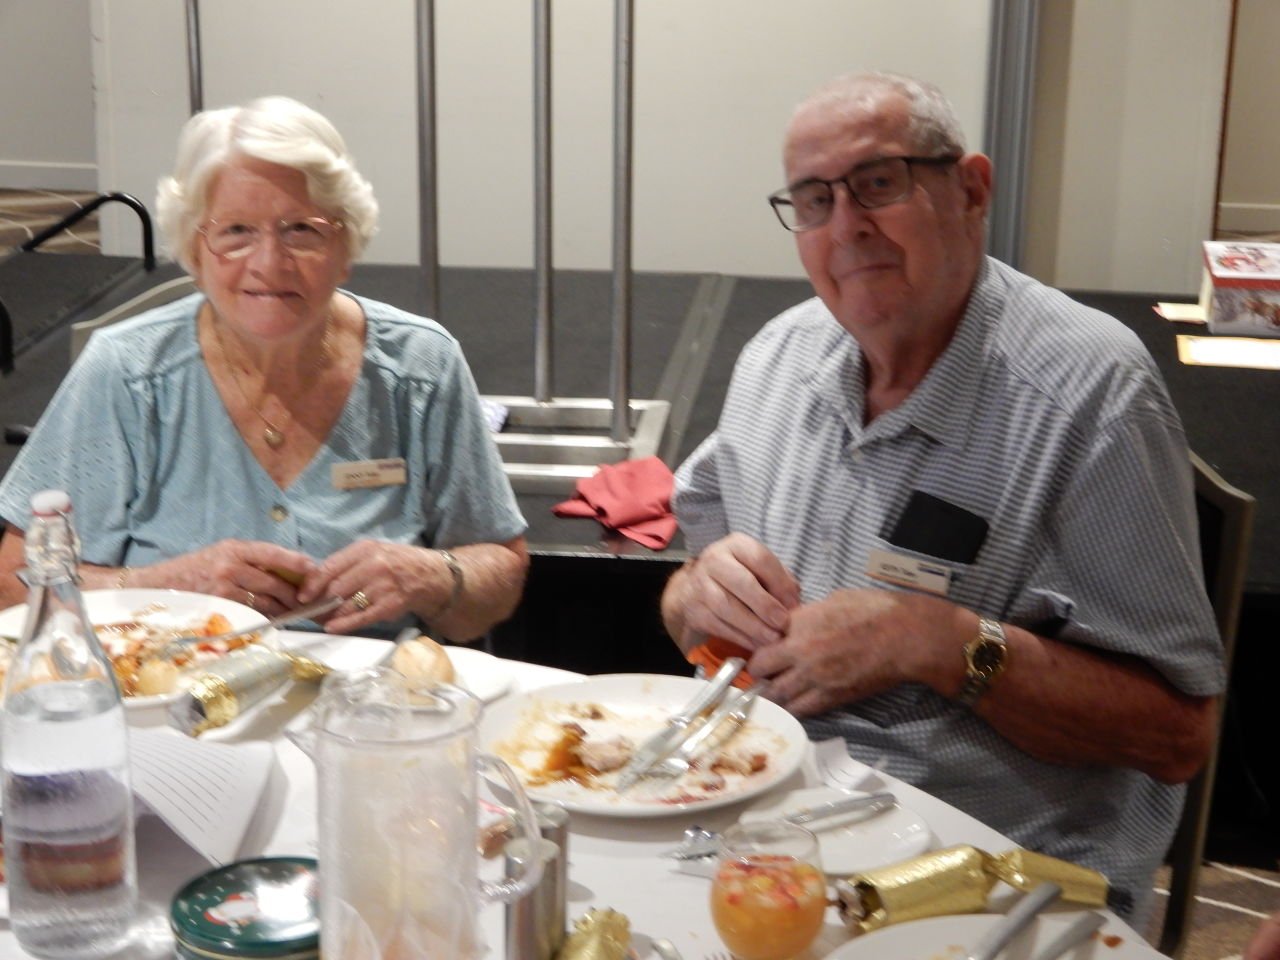 Our President and Husband enjoying lunch at the Kedron Wavel Services Club